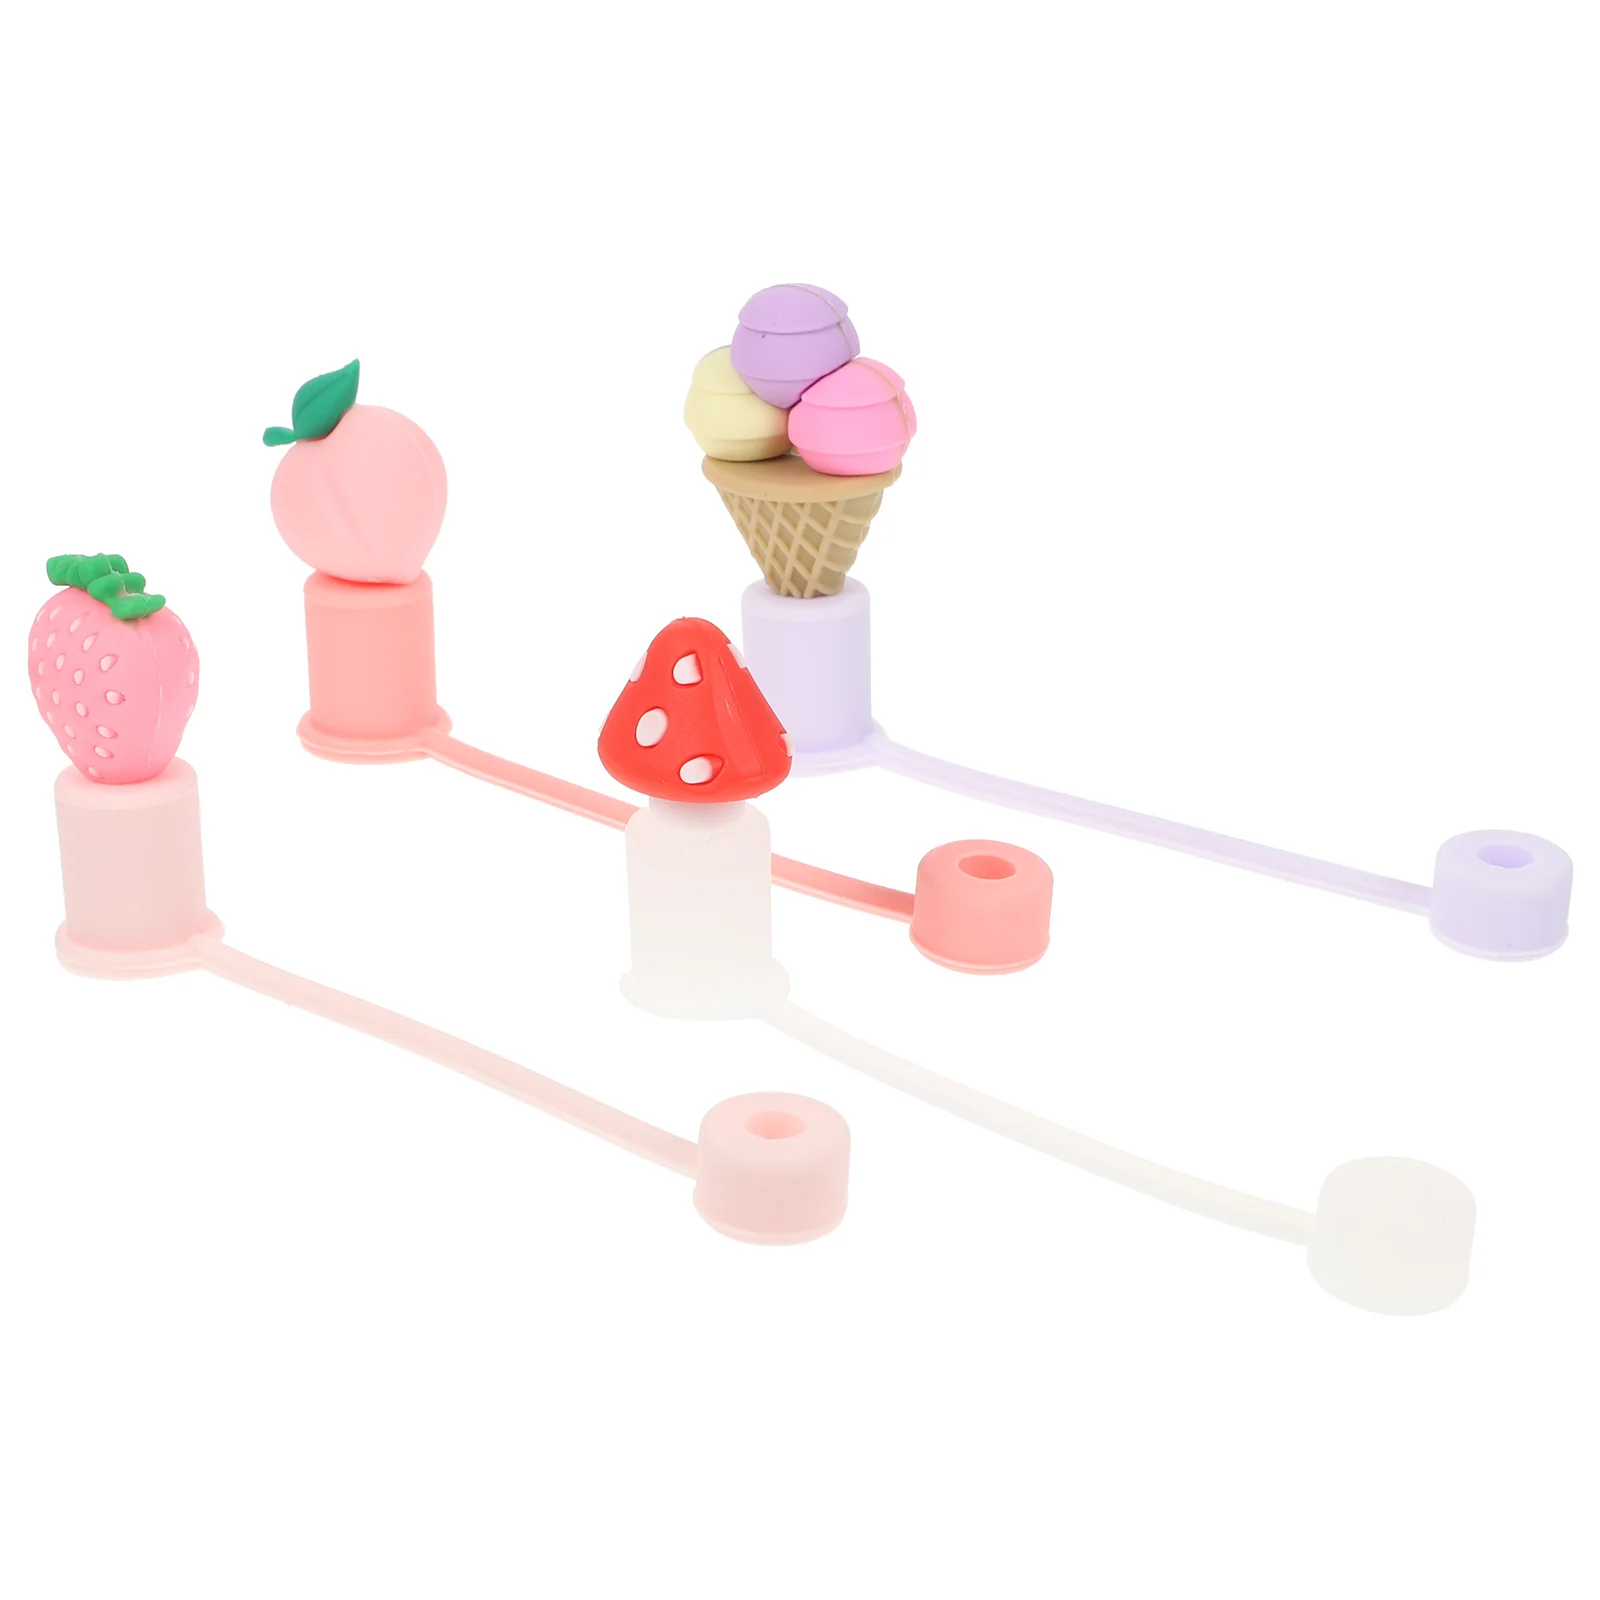 

Straw Covers Cap Toppers Cute Topper Reusable Decor Straws Cocktail Caps End Plugs Mushroom Easter Tips Cover Drinking Tumblers